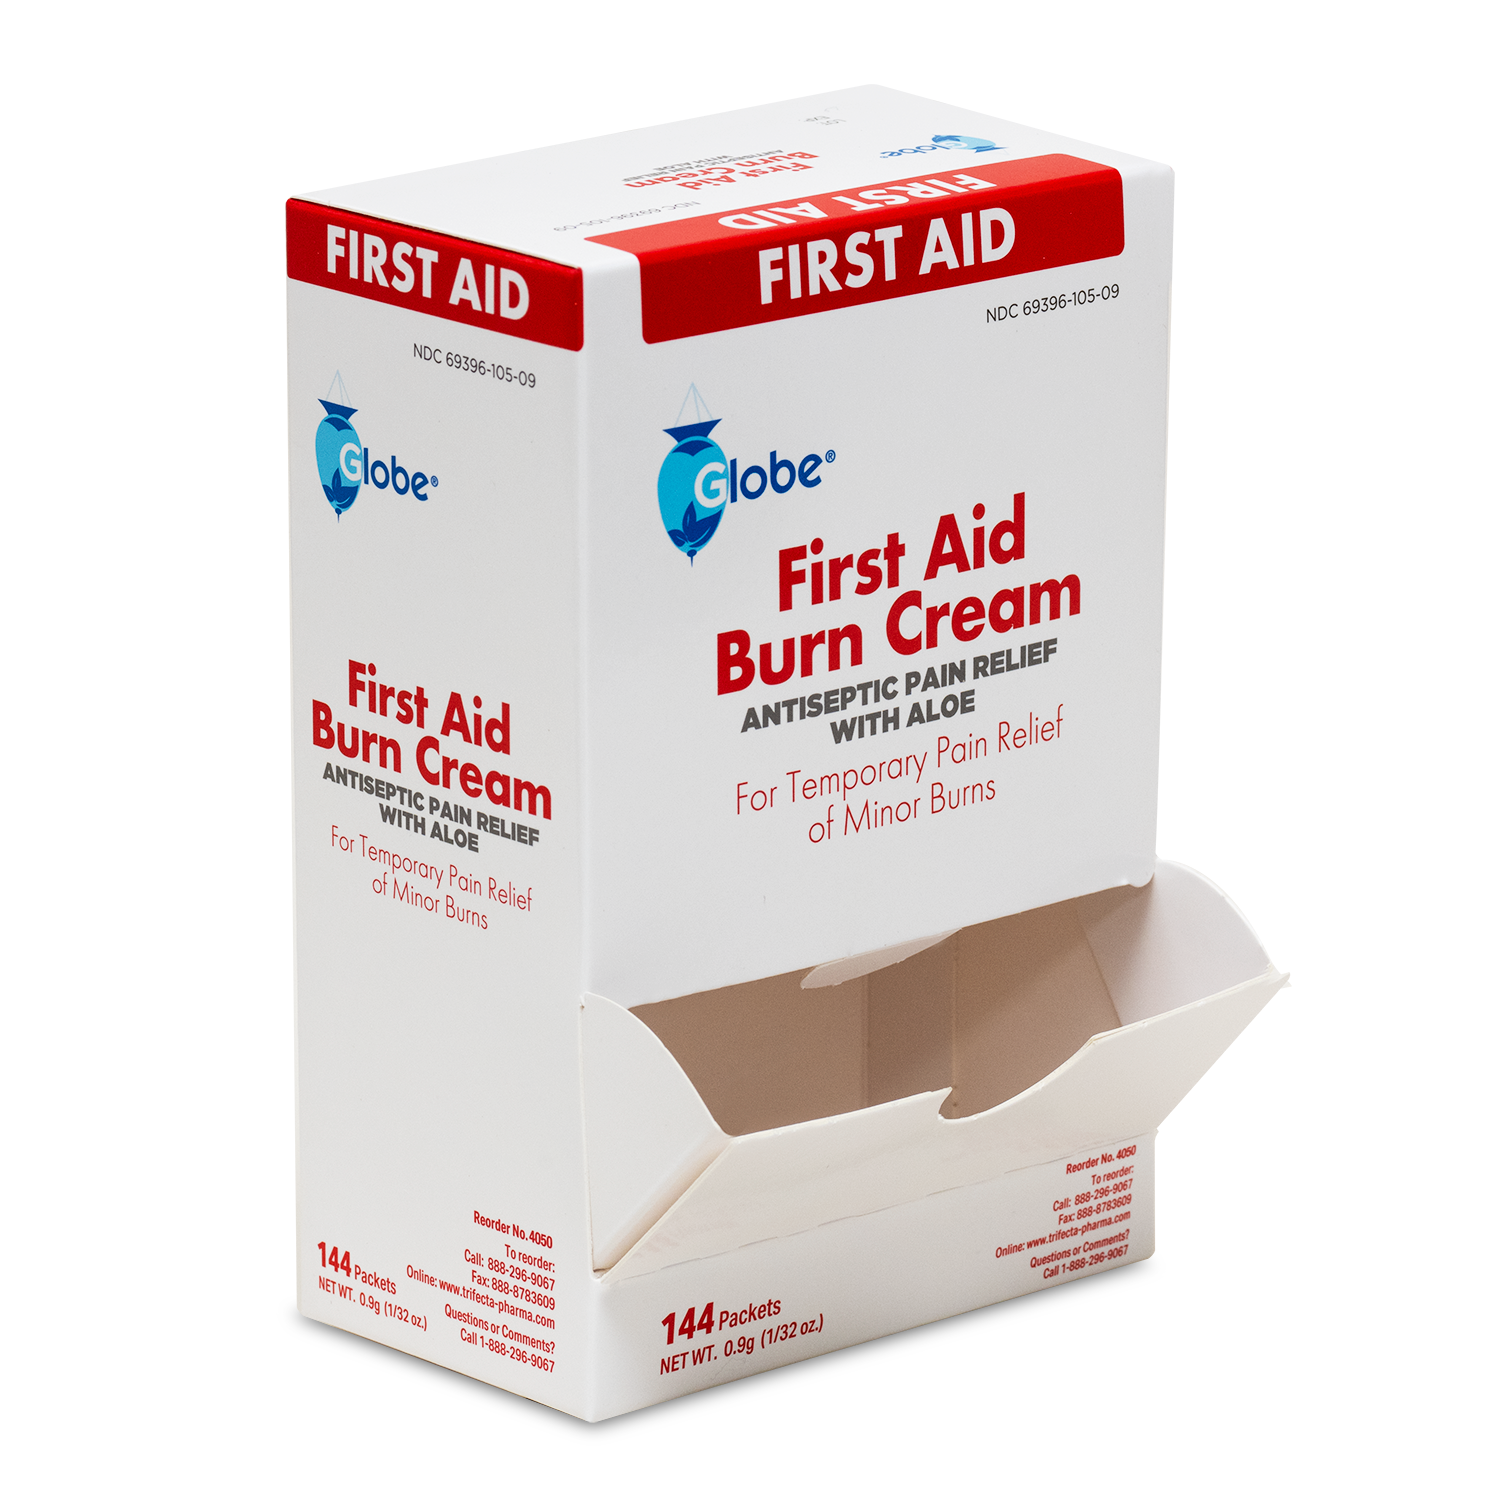 Globe First Aid Burn Cream 0.9g Packets, (Box of 144) First Aid Cream for Temporary Relief of Minor Burns, Cuts, and Scrapes